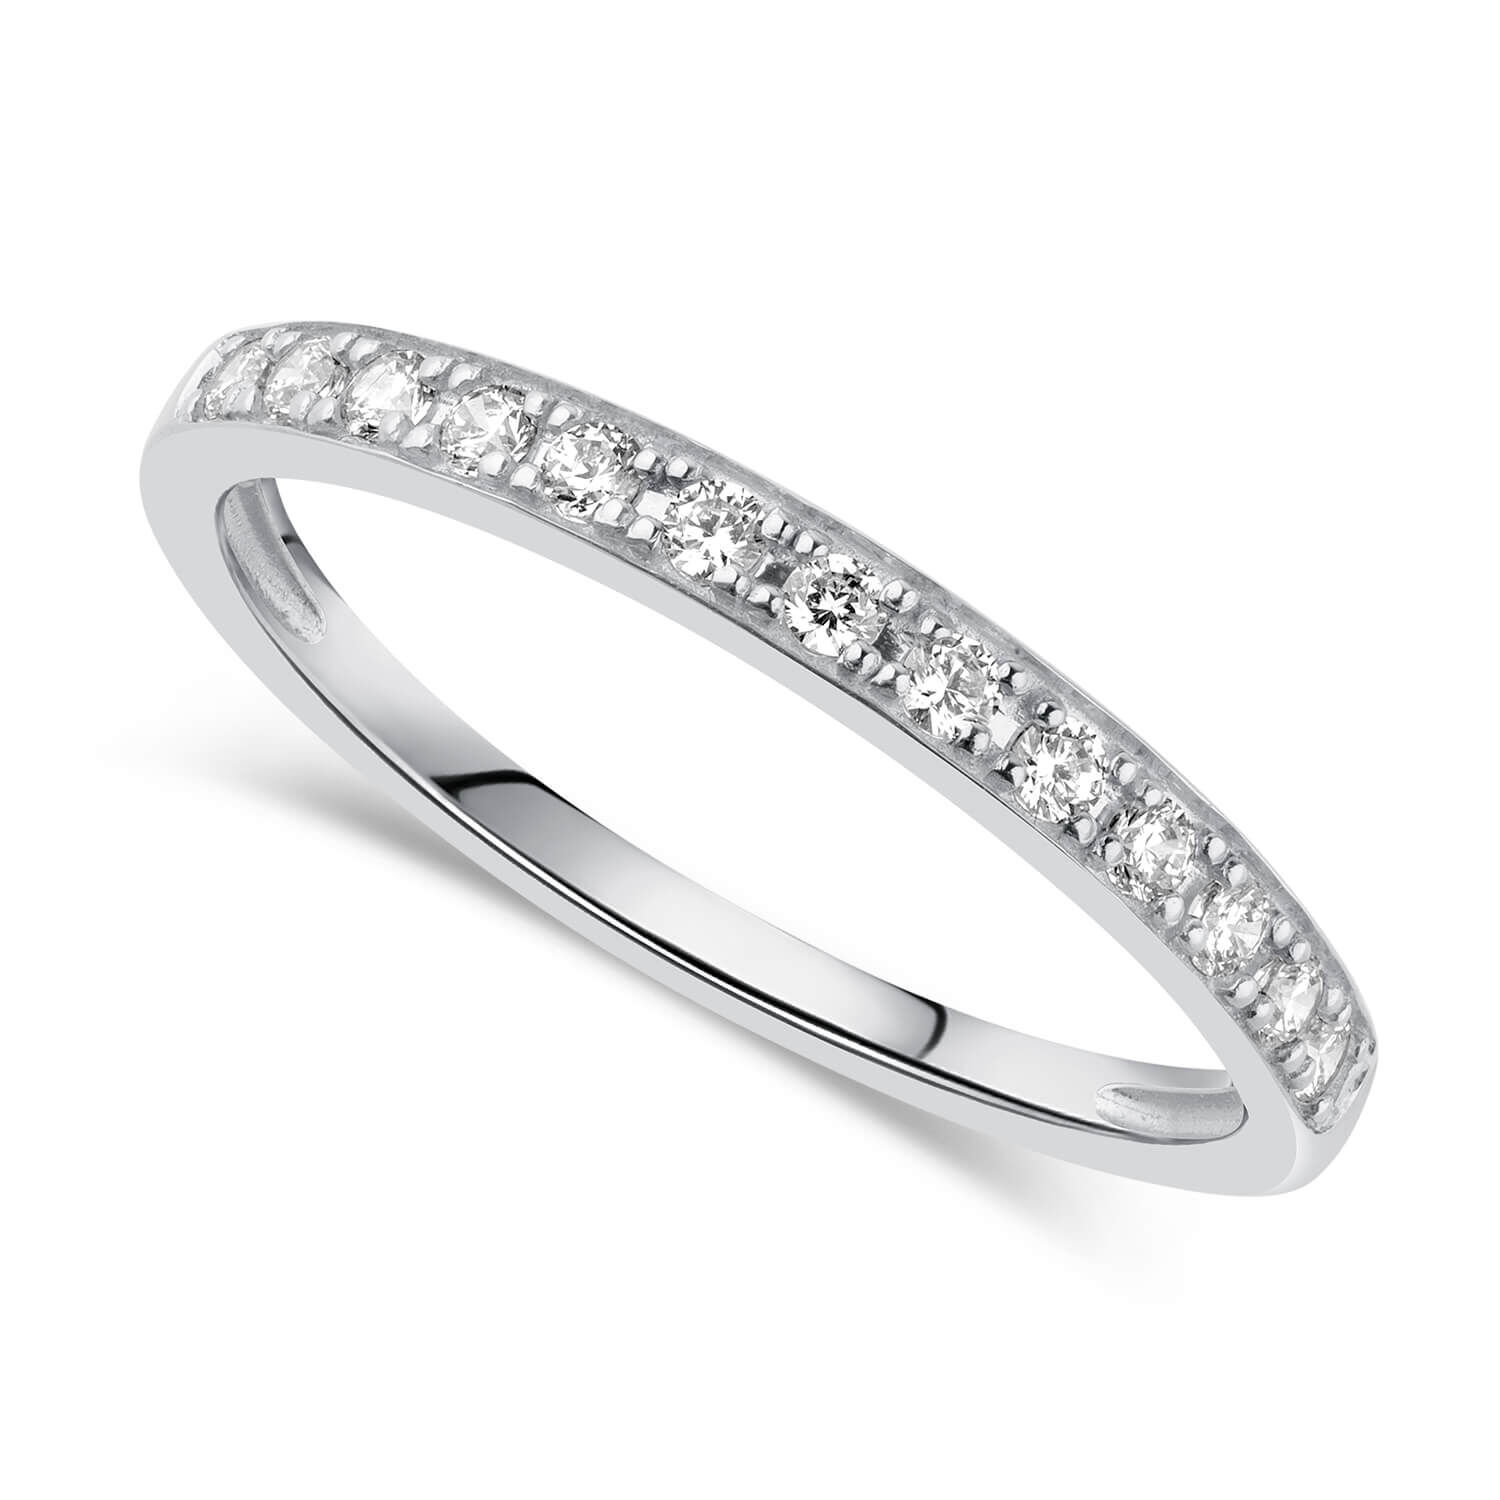 Pave Set Heart Shaped Diamond Eternity Ring 14k White Gold 0.60ct - clear509